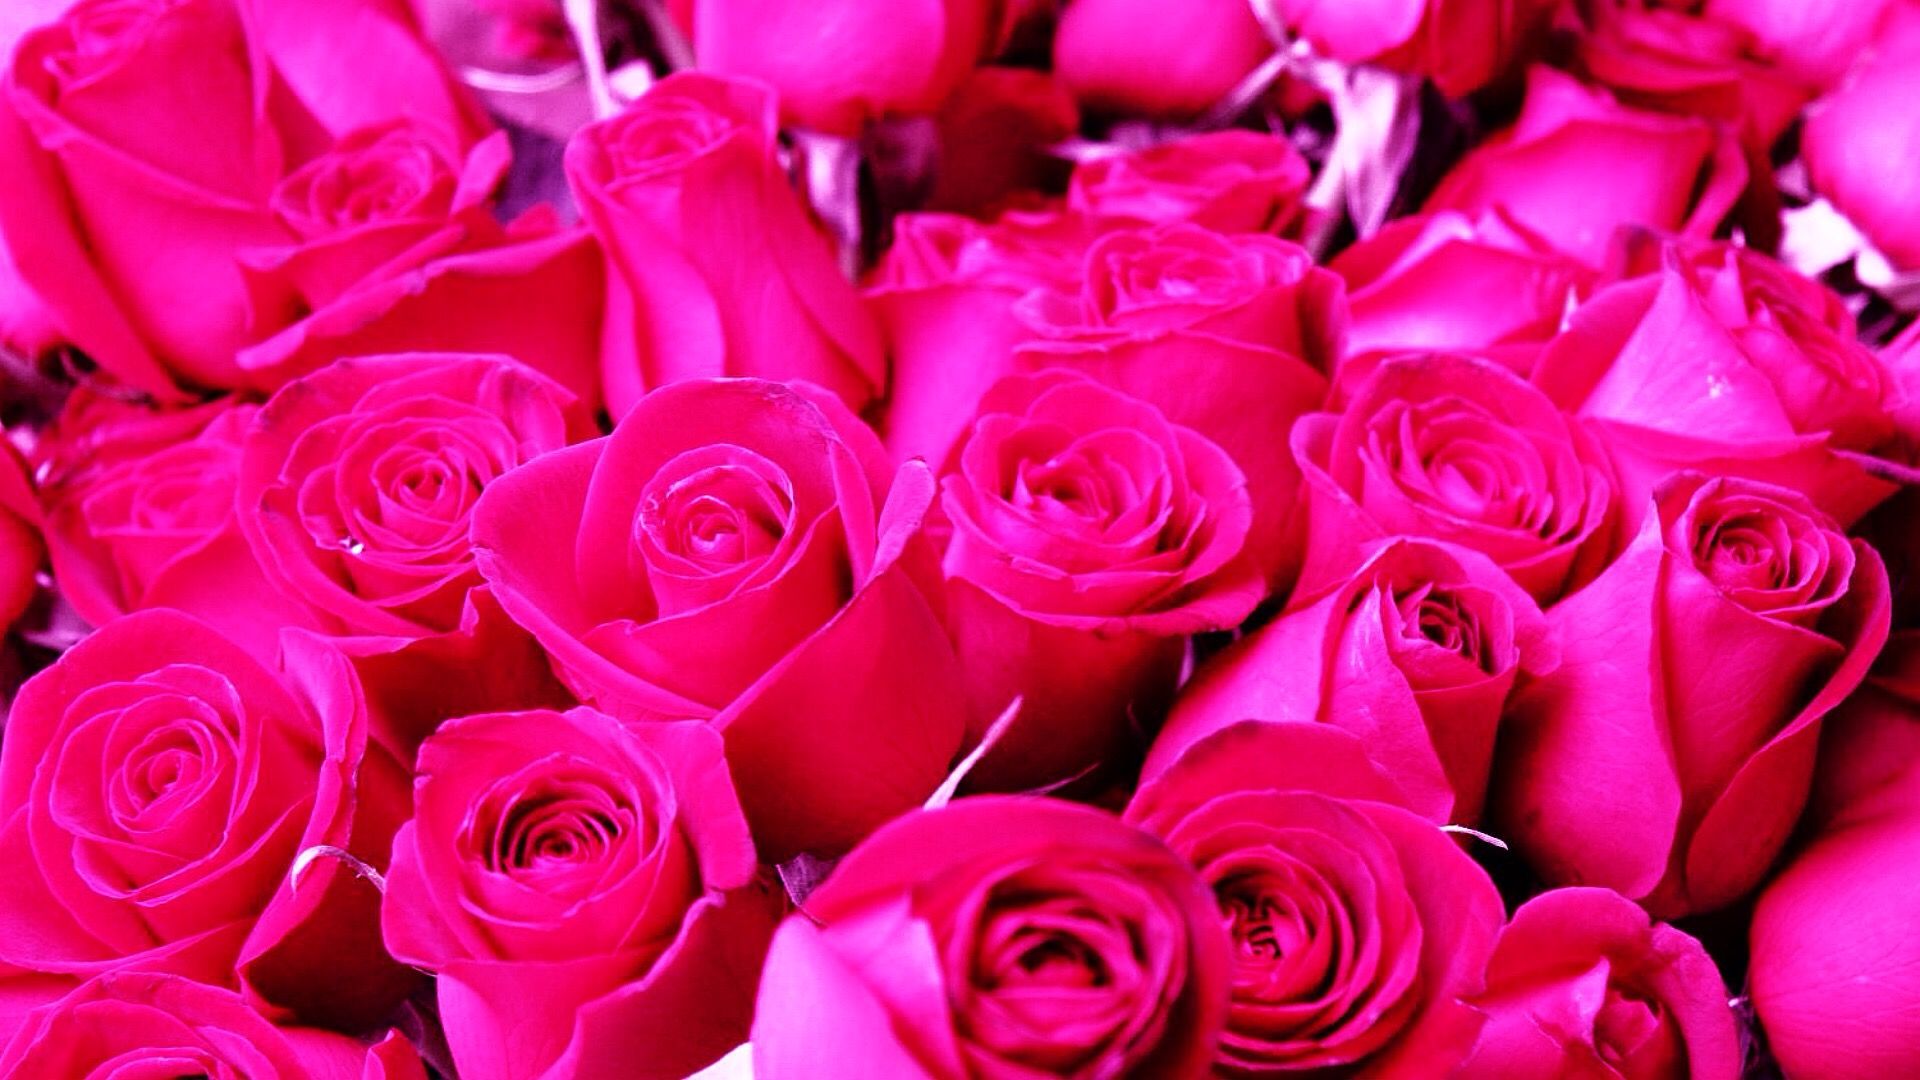 Pretty Roses Just in Time for Valentine's Evening | Petite Girls Guide